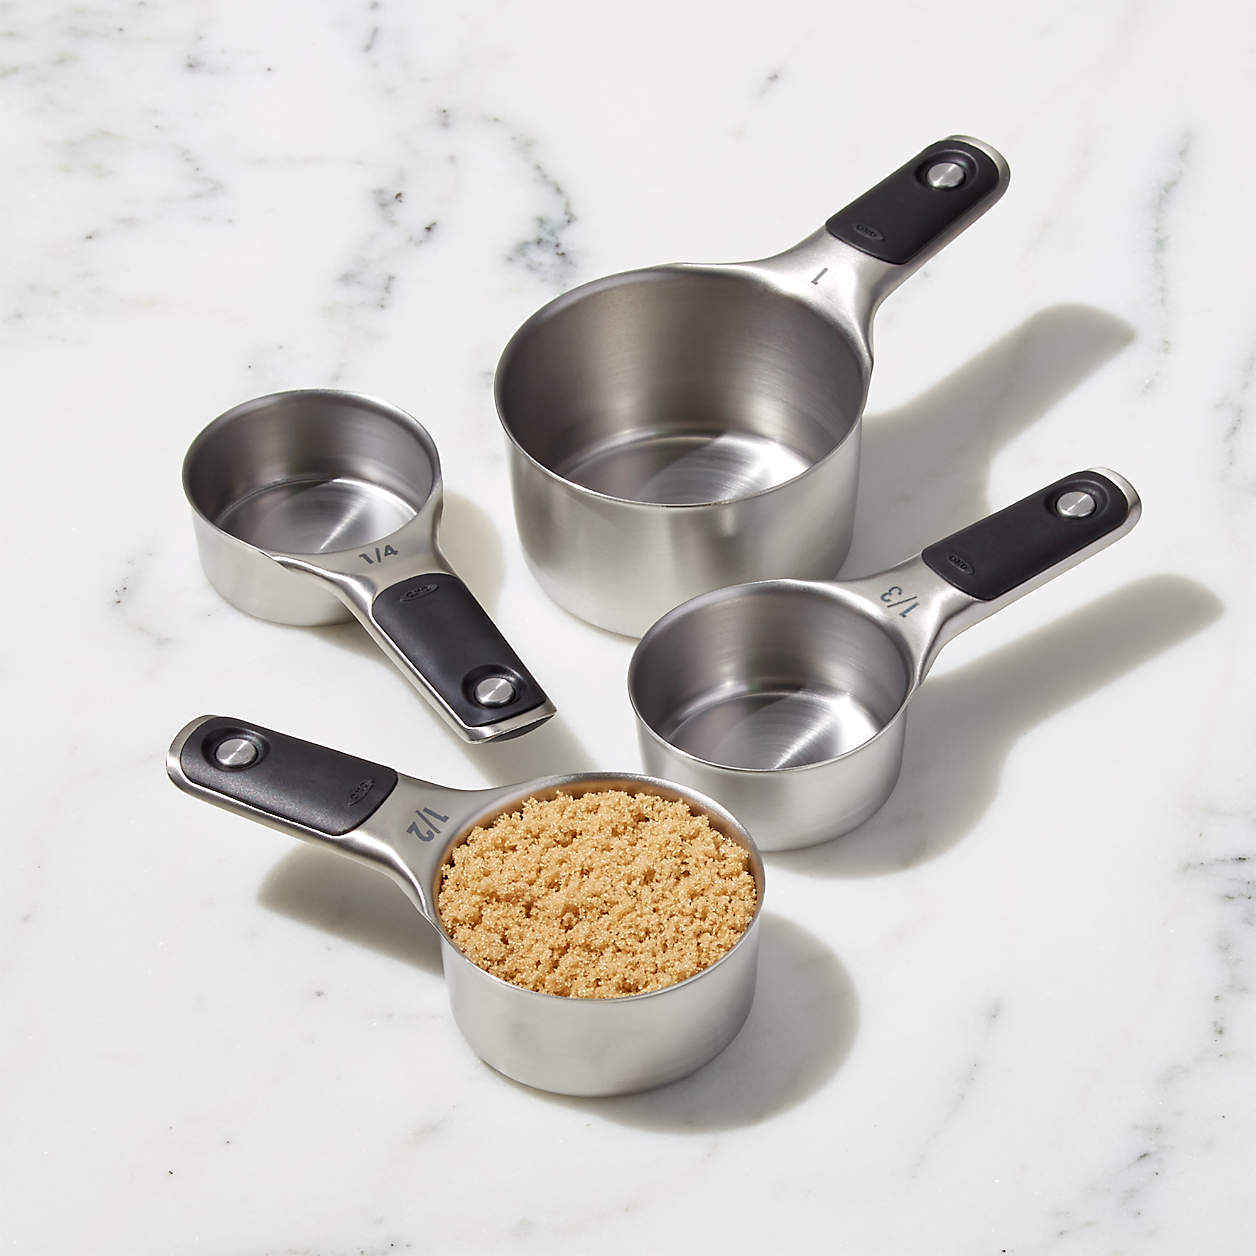 OXO - Stainless Steel Measuring Cups, Set of 4